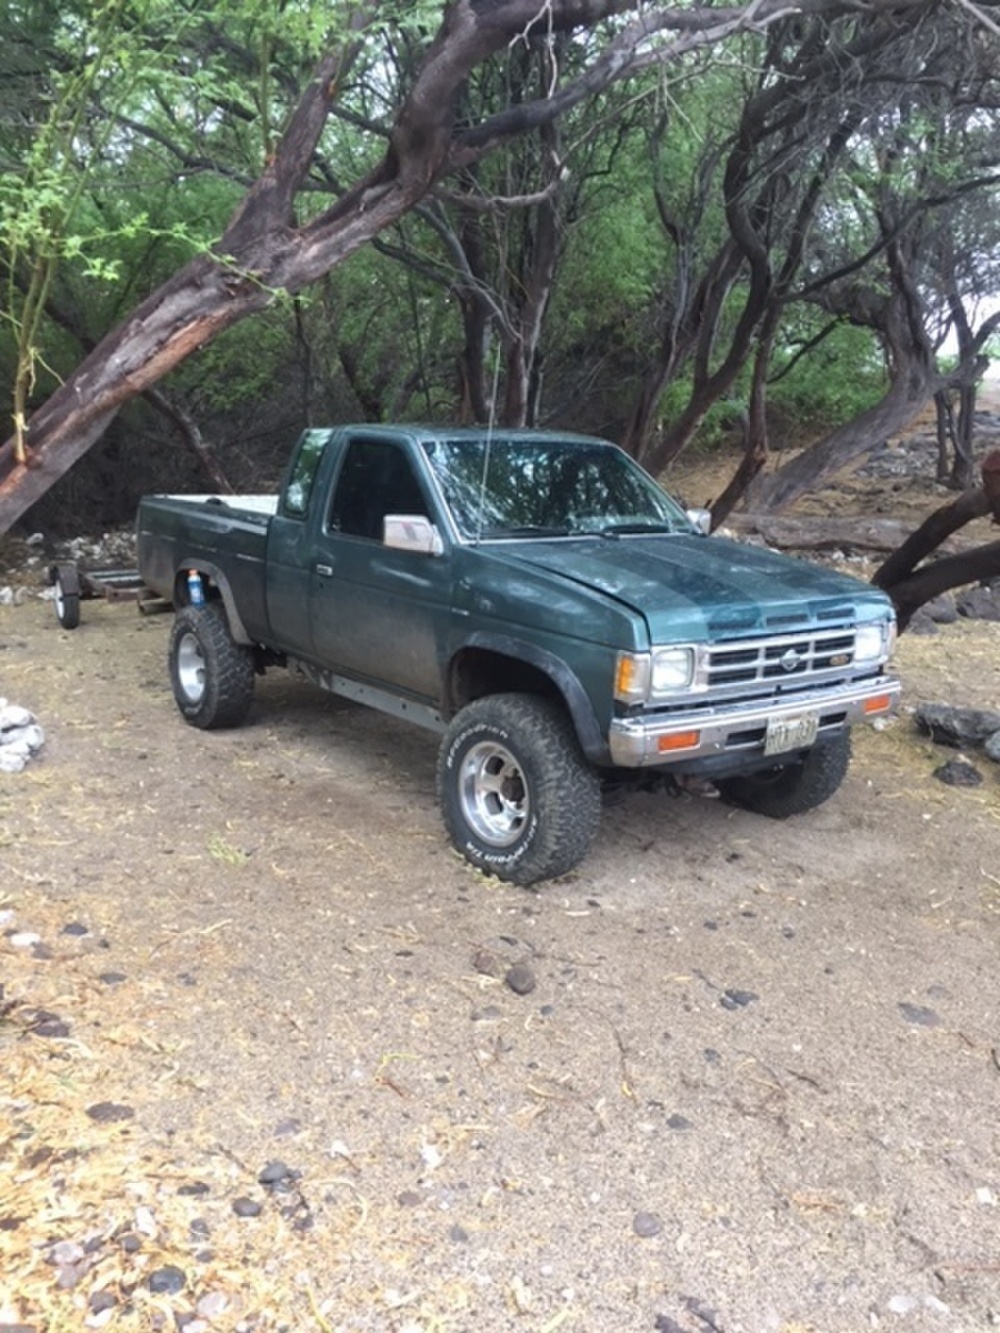 The Coast Guard is searching for two possible persons in the water off of the Big Island, five miles north of Kawaihae and the Kohala district, Dec. 4, 2016. A green Nissan truck and trailer believed to belong to one of the boaters was left at the campsite. Courtesy photo.